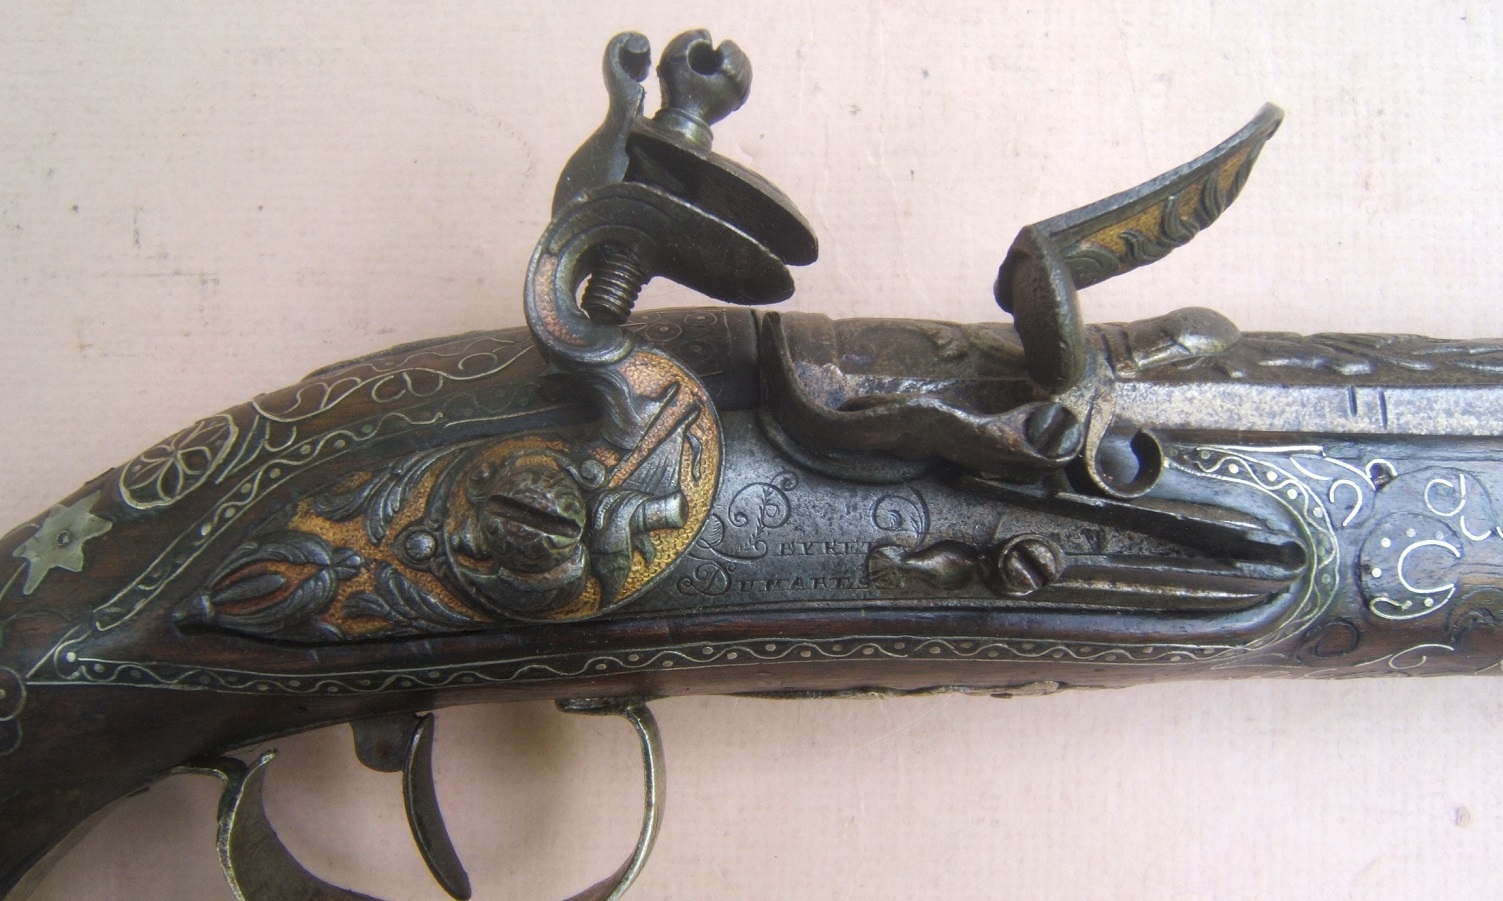 A VERY FINE QUALITY FRENCH SILVER MOUNTED & GOLD DAMASCENED FLINTLOCK HOLSTER PISTOL, by PEYRTE DUMAREST (FOR EASTERN/TURKISH MARKET, ca. 1780 view 3